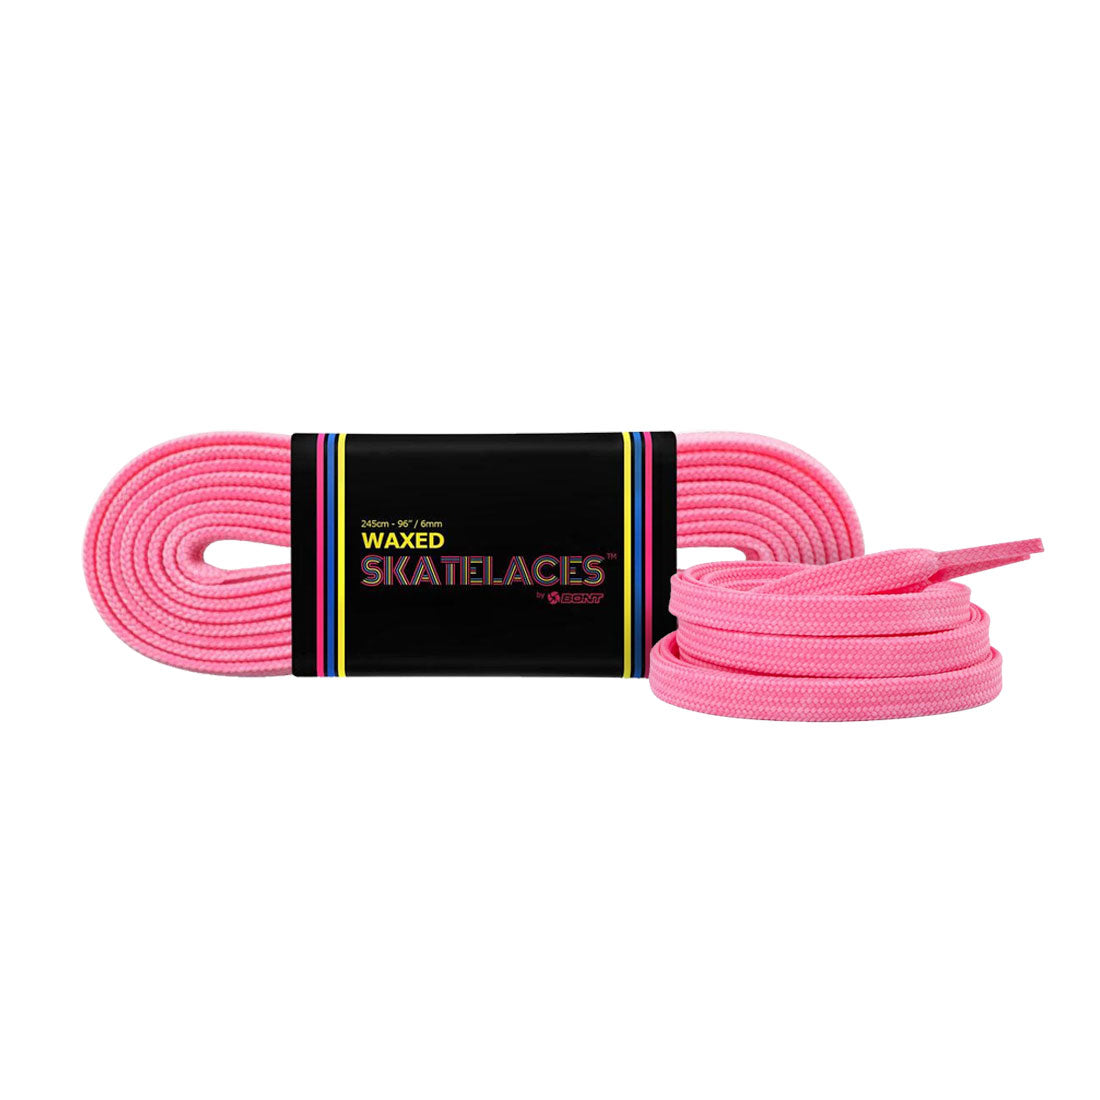 Bont Waxed 8mm Laces - 150cm/59in Cosmo Pink Laces